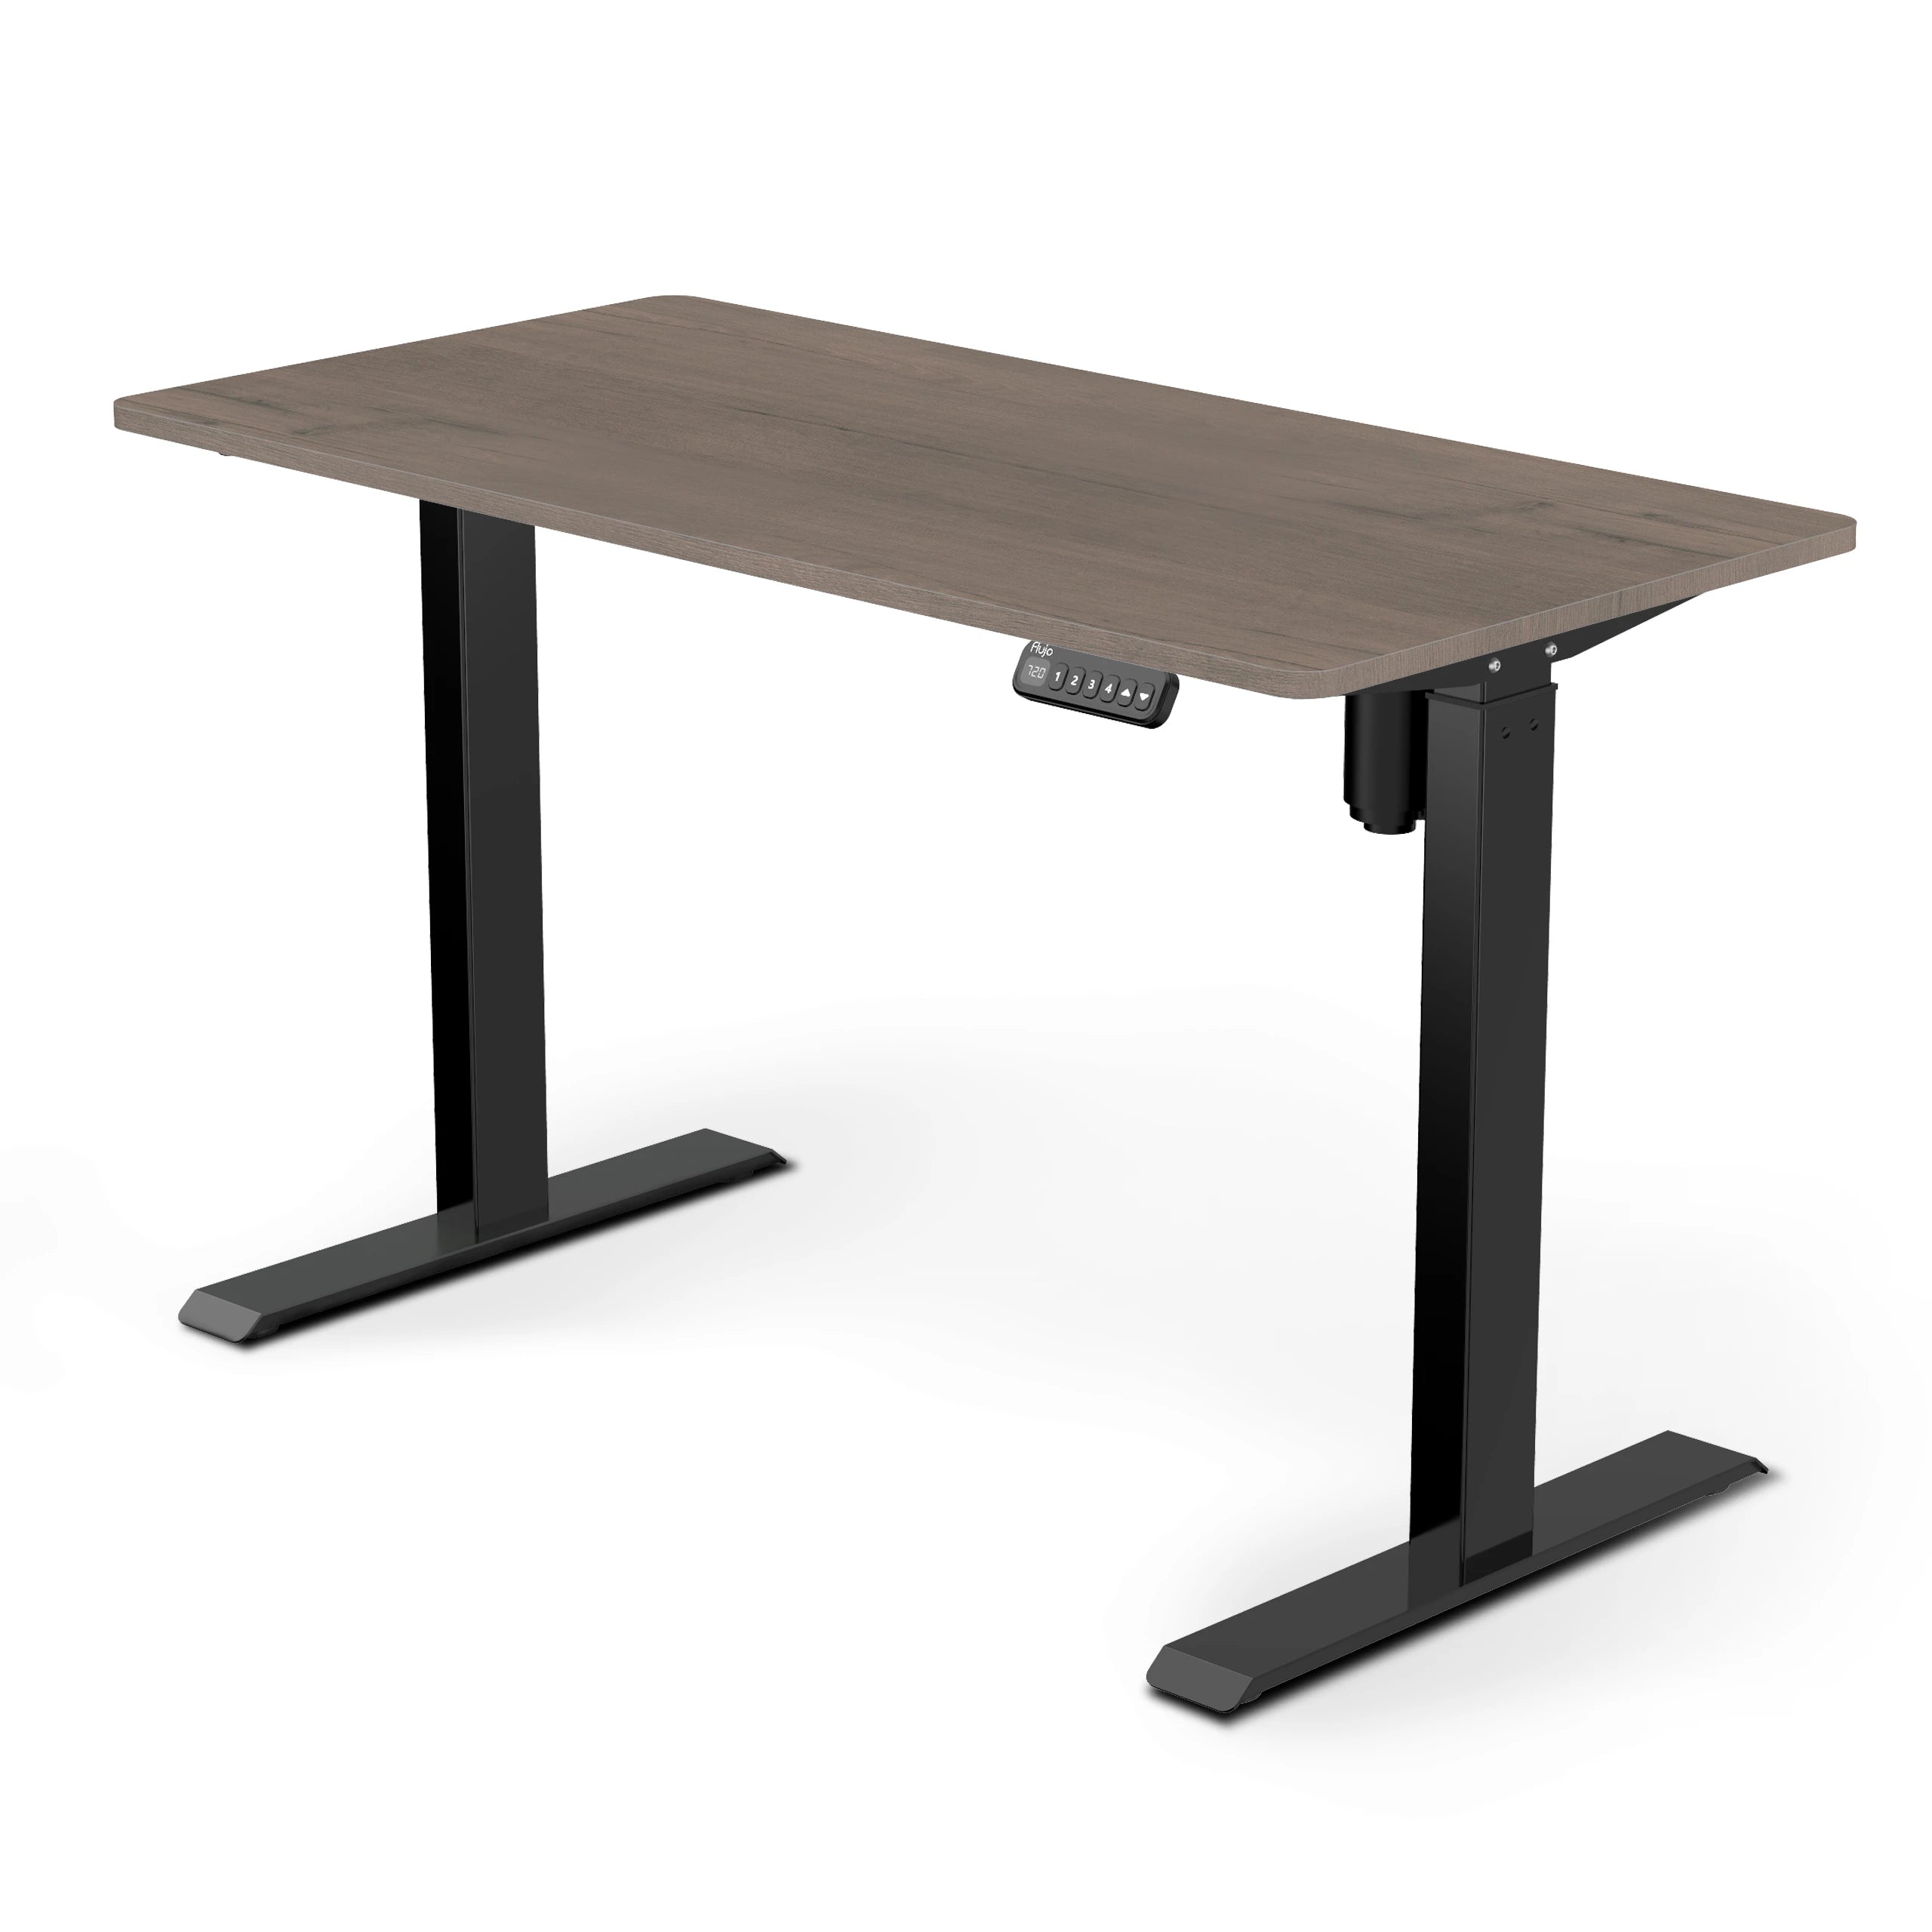 SmarTrax Ergonomic Standing Desk featuring a arizona wood finish and black frame, complete with programmable height settings for a comfortable standing work experience.